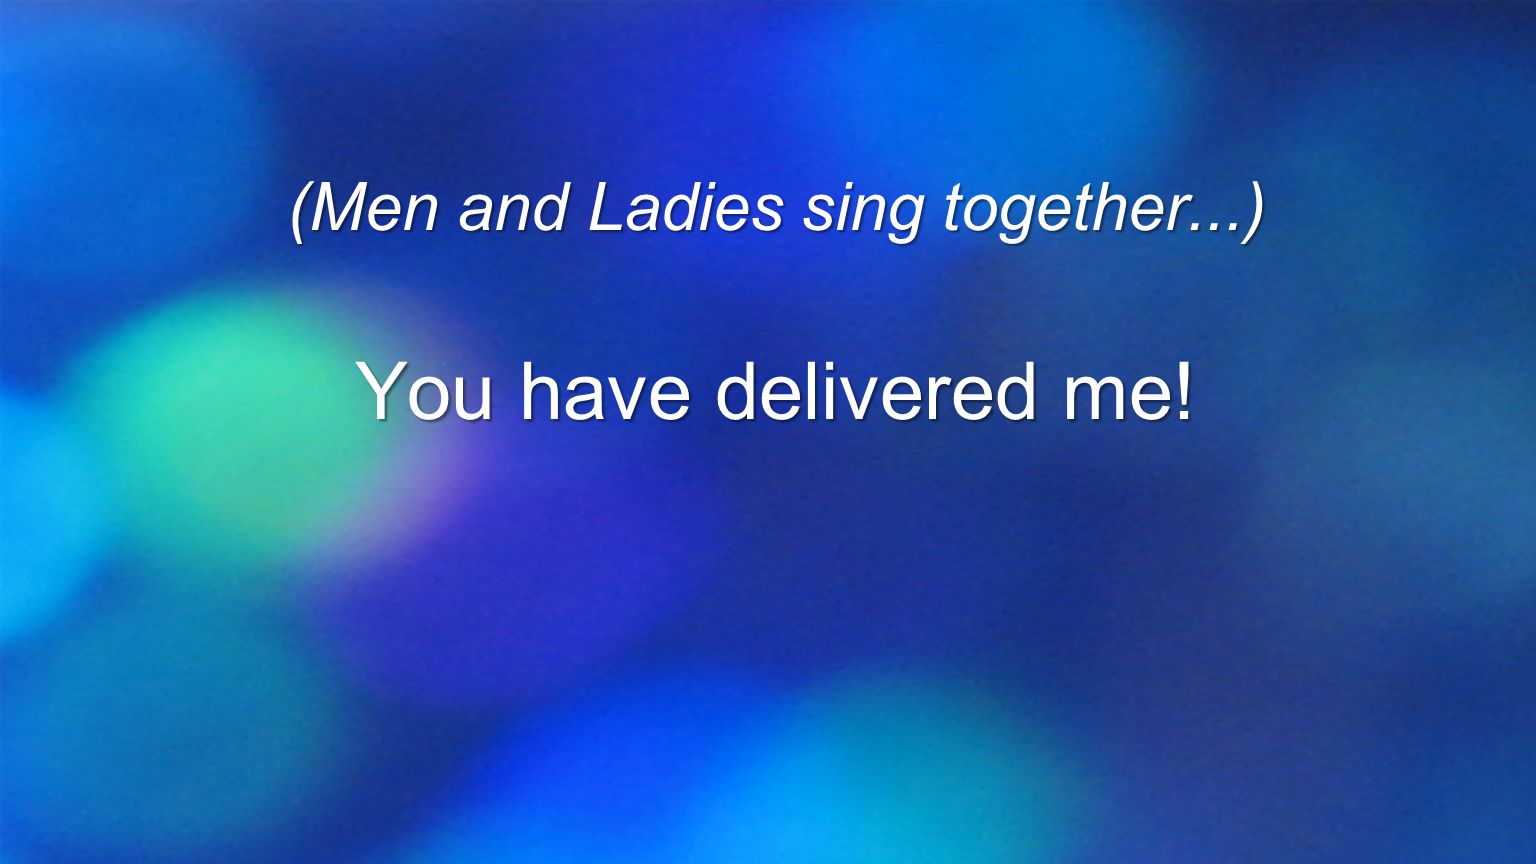 (Men and Ladies sing together...) You have delivered me!